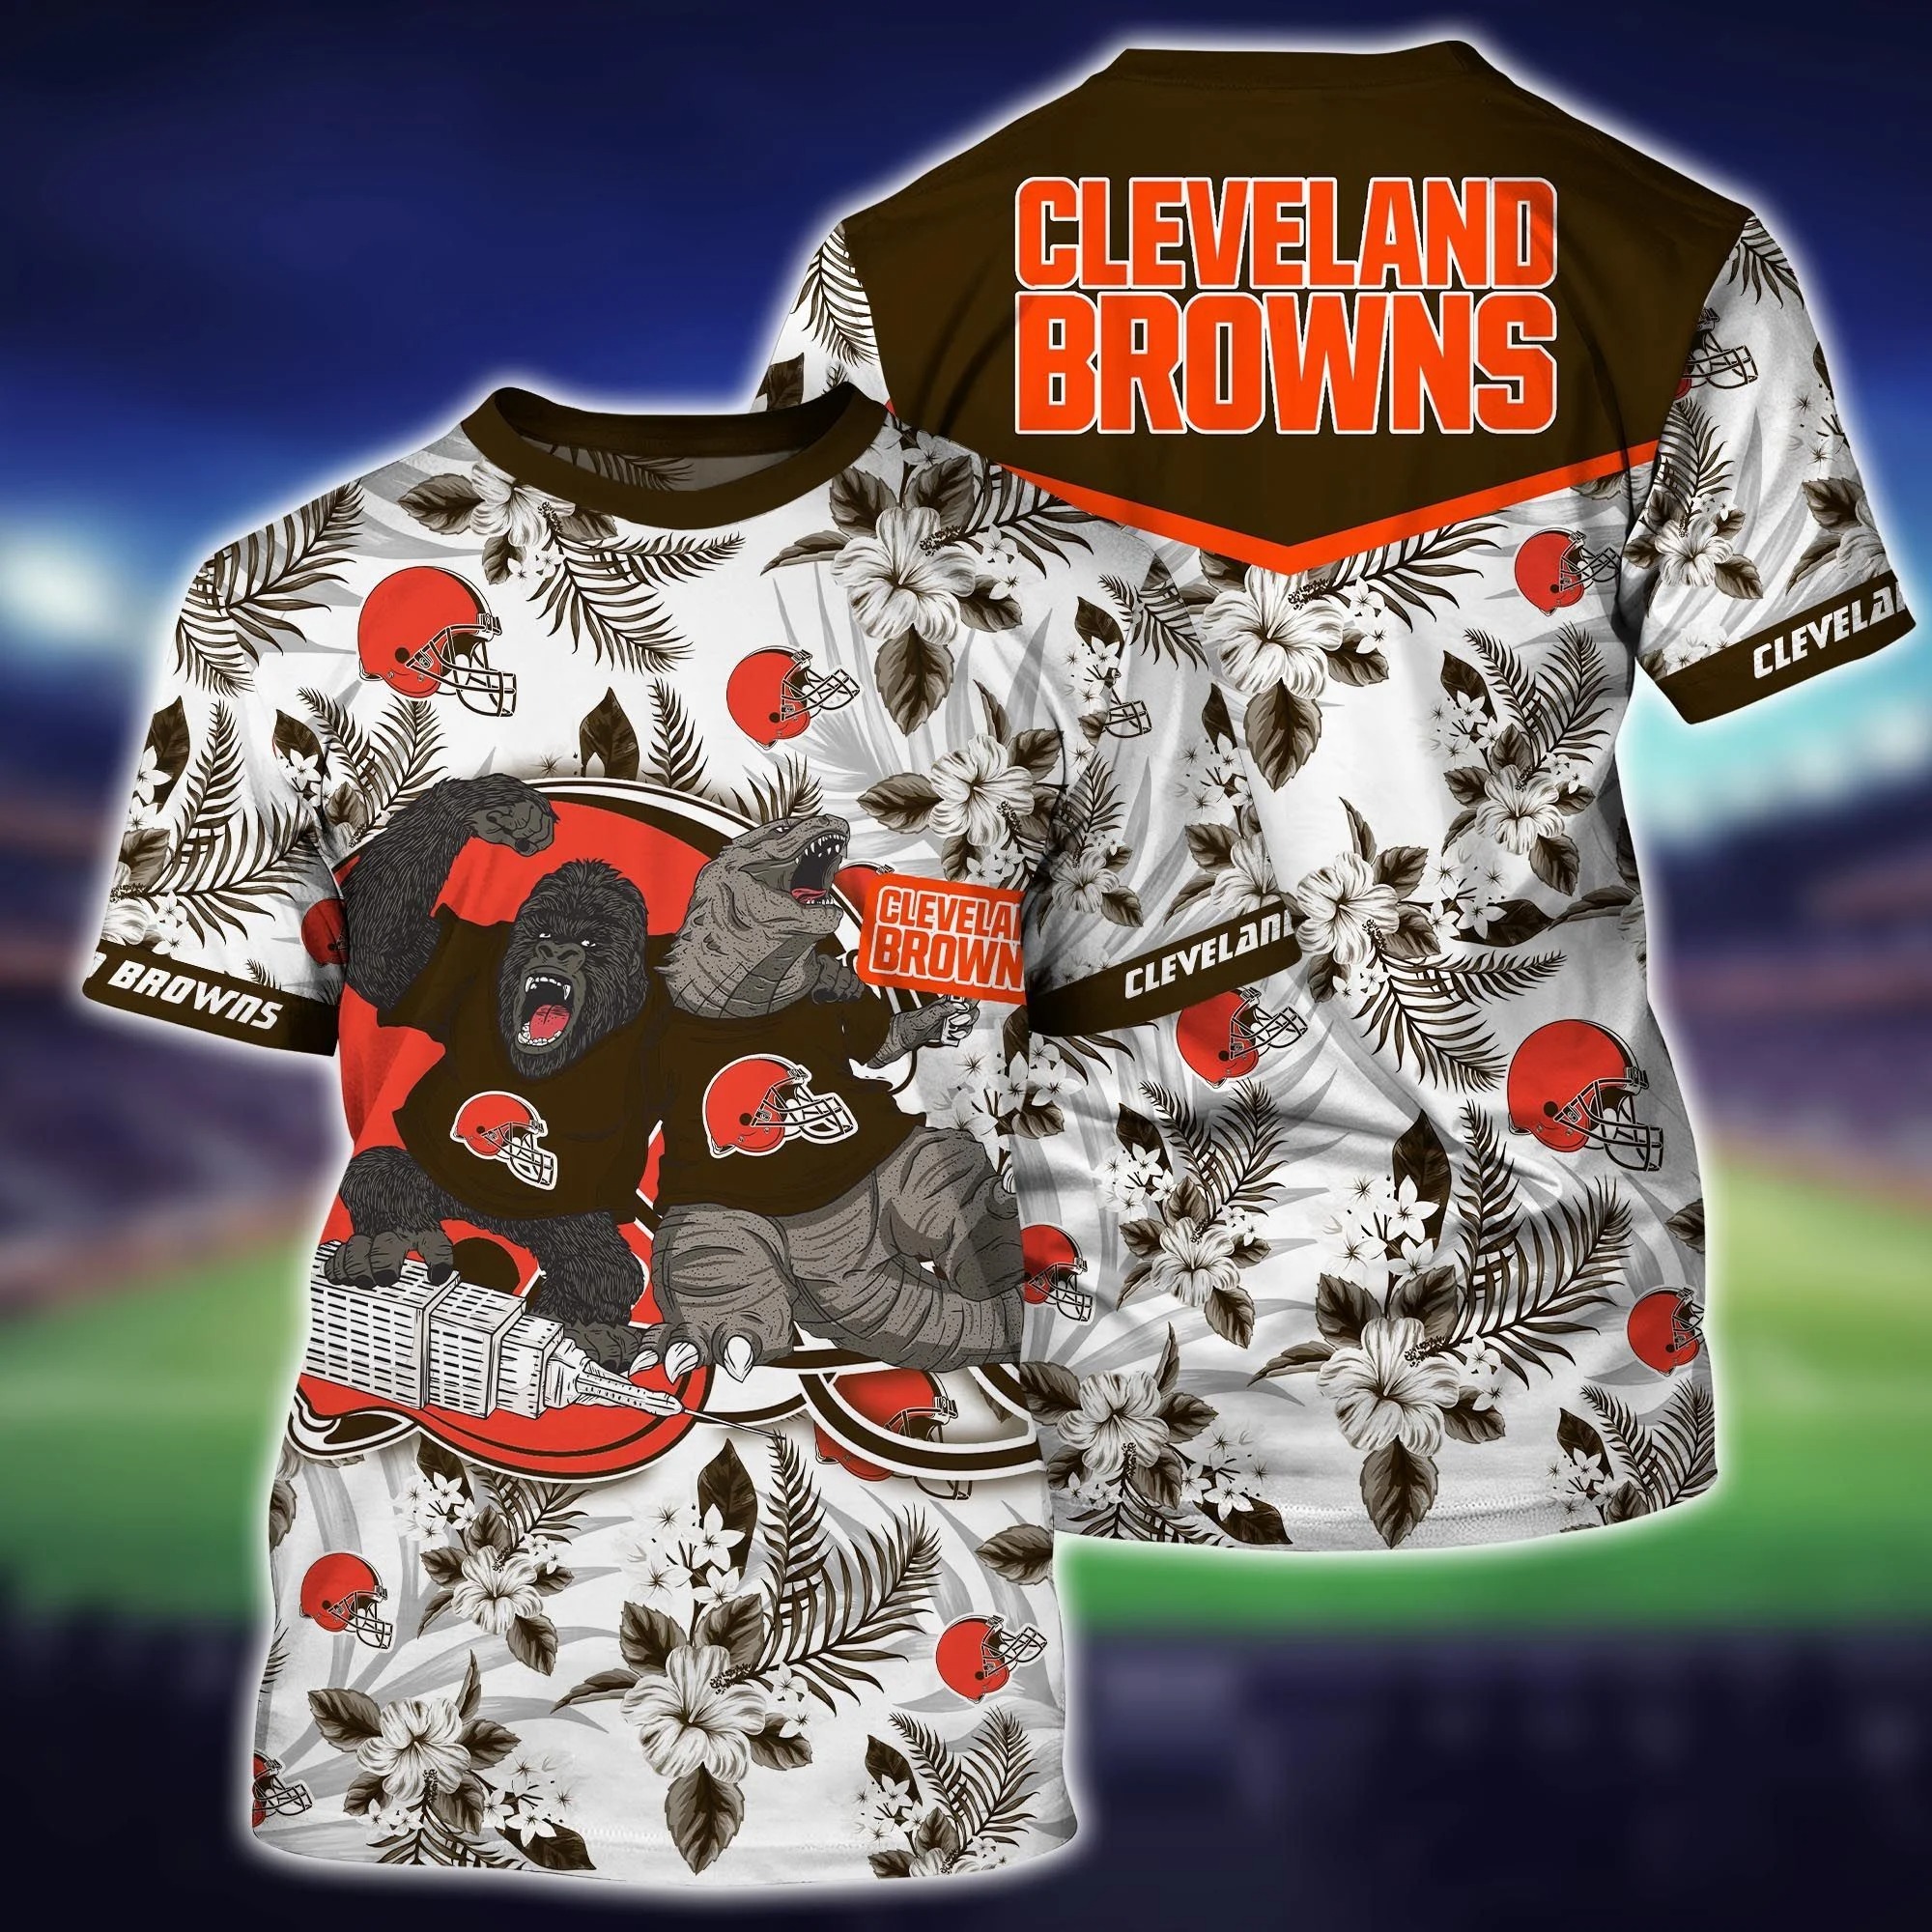 Cleveland Browns King Kong Godzilla tropical flowers 3d T-Shirt – LIMITED EDITION